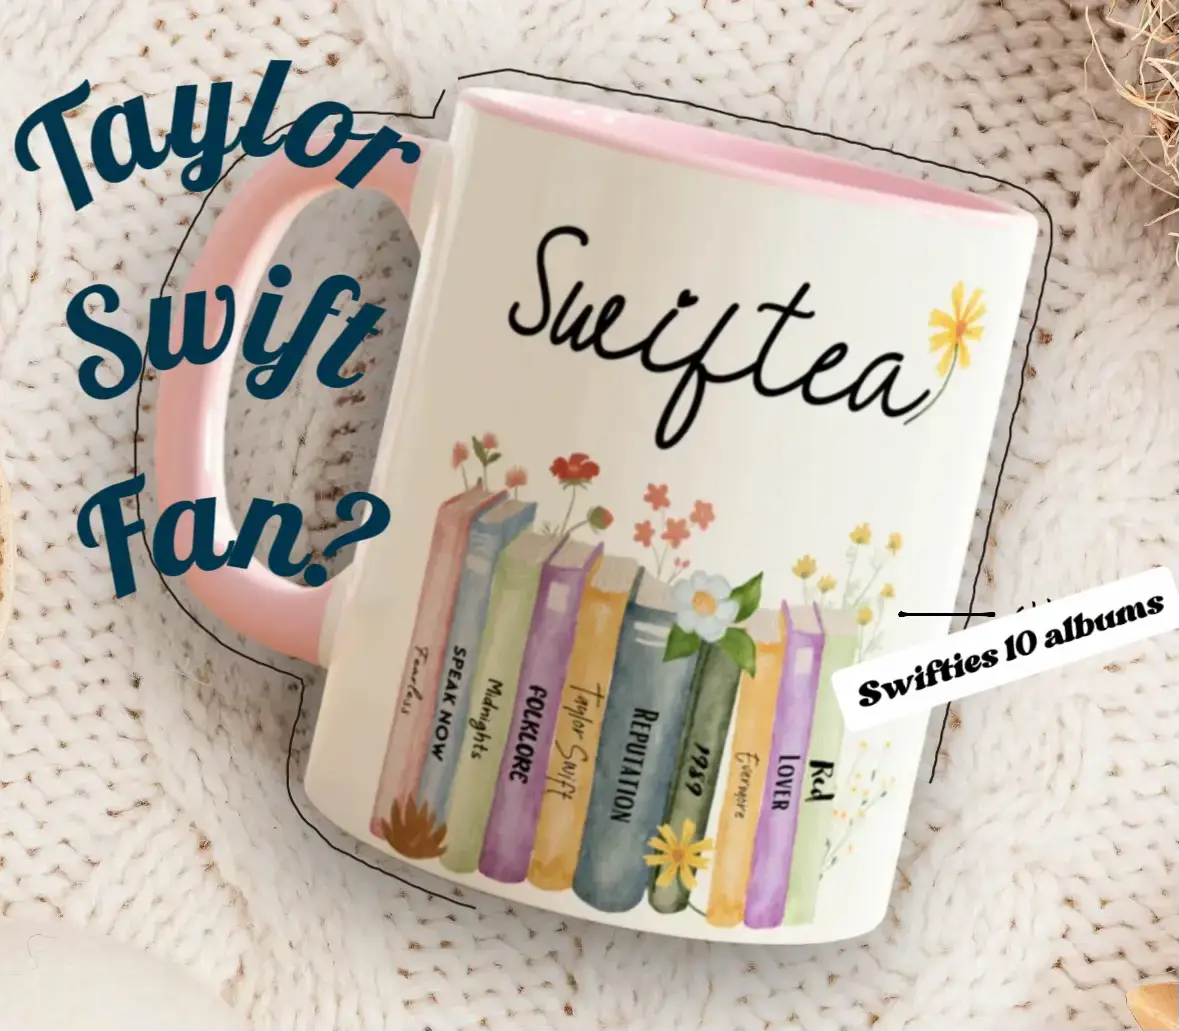 Taylor Swift car air freshener are on sale! 1989,Speak Now,Midnights a